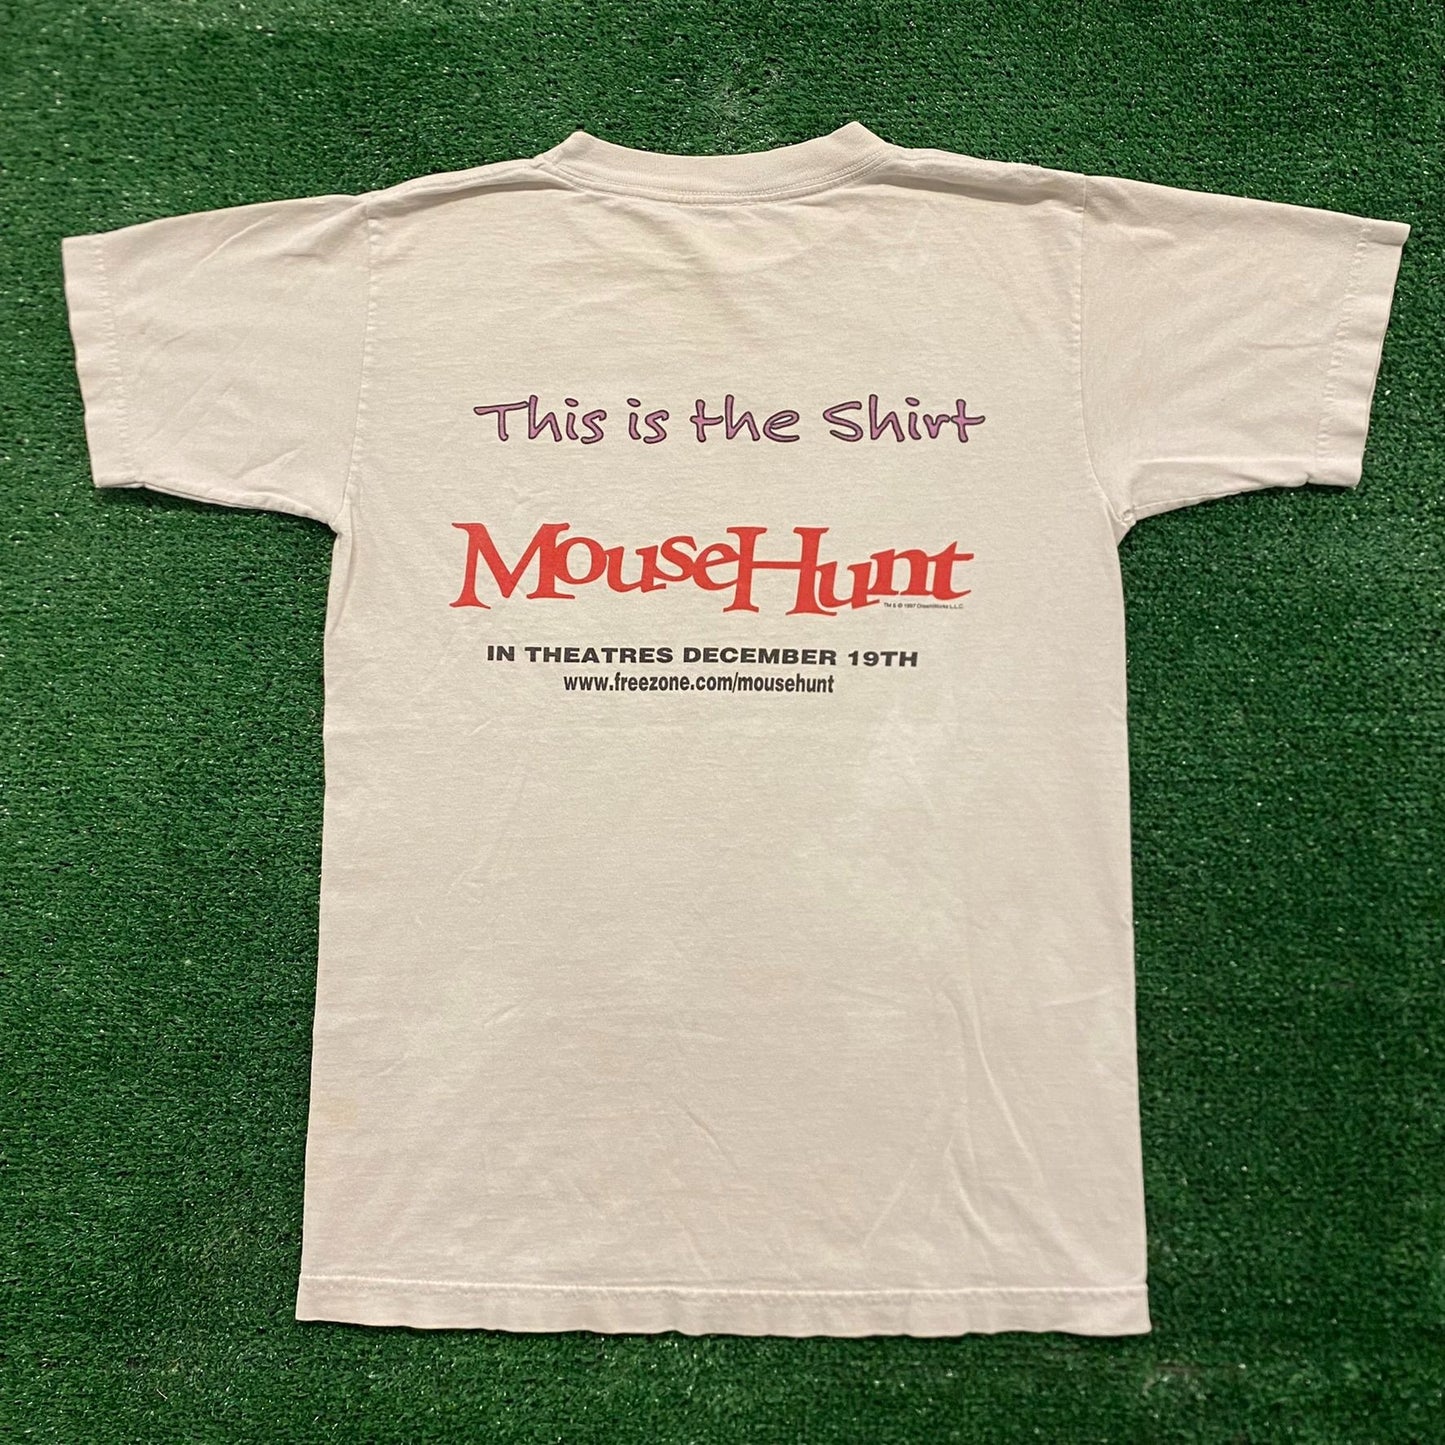 Mouse Hunt Vintage 90s Humor Comedy Movie Promo T-Shirt